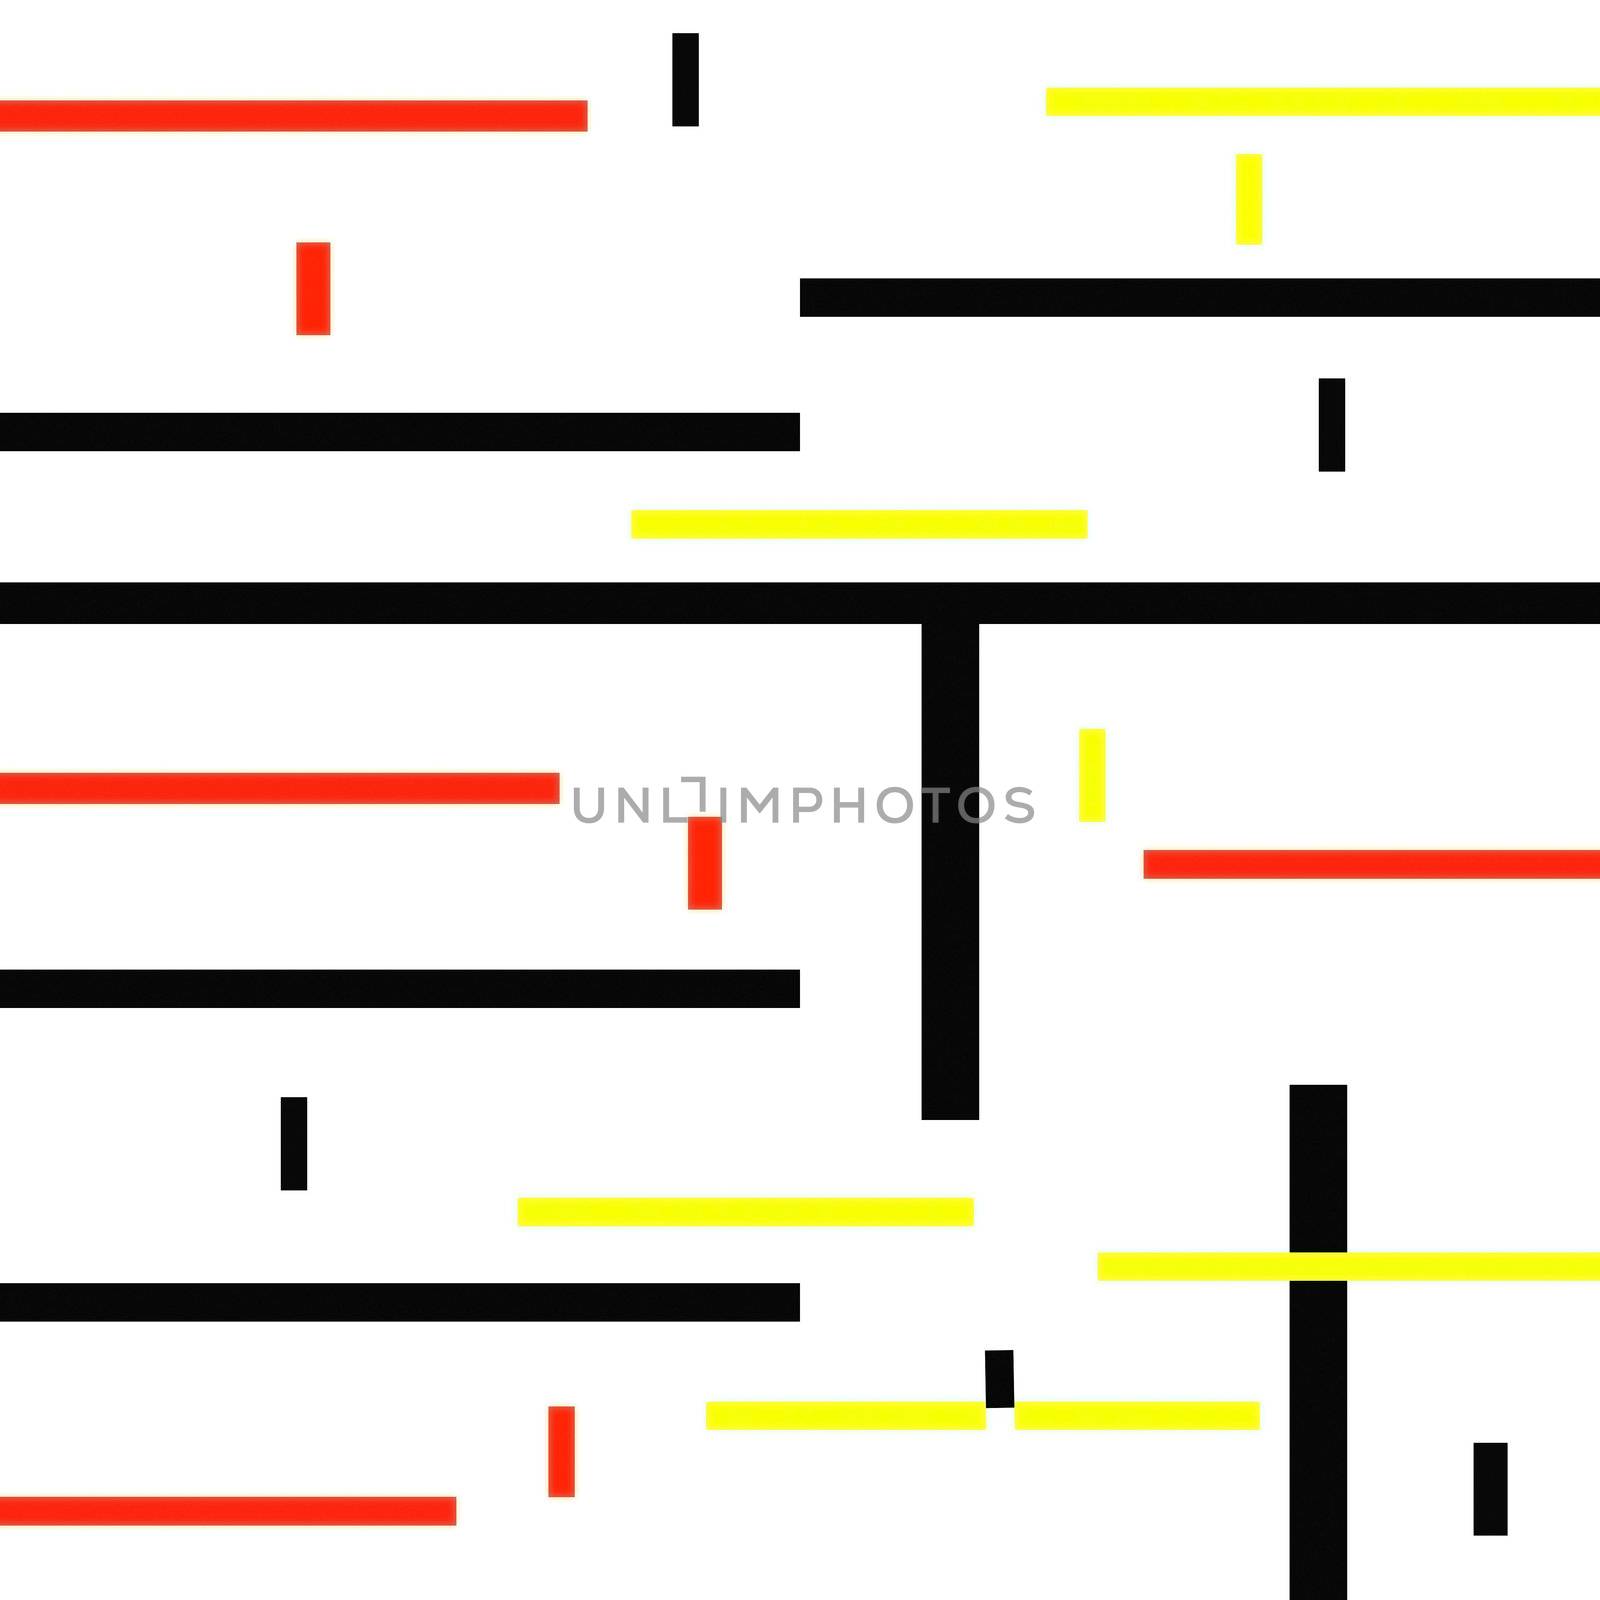 Mondrian type abstract art by hicster